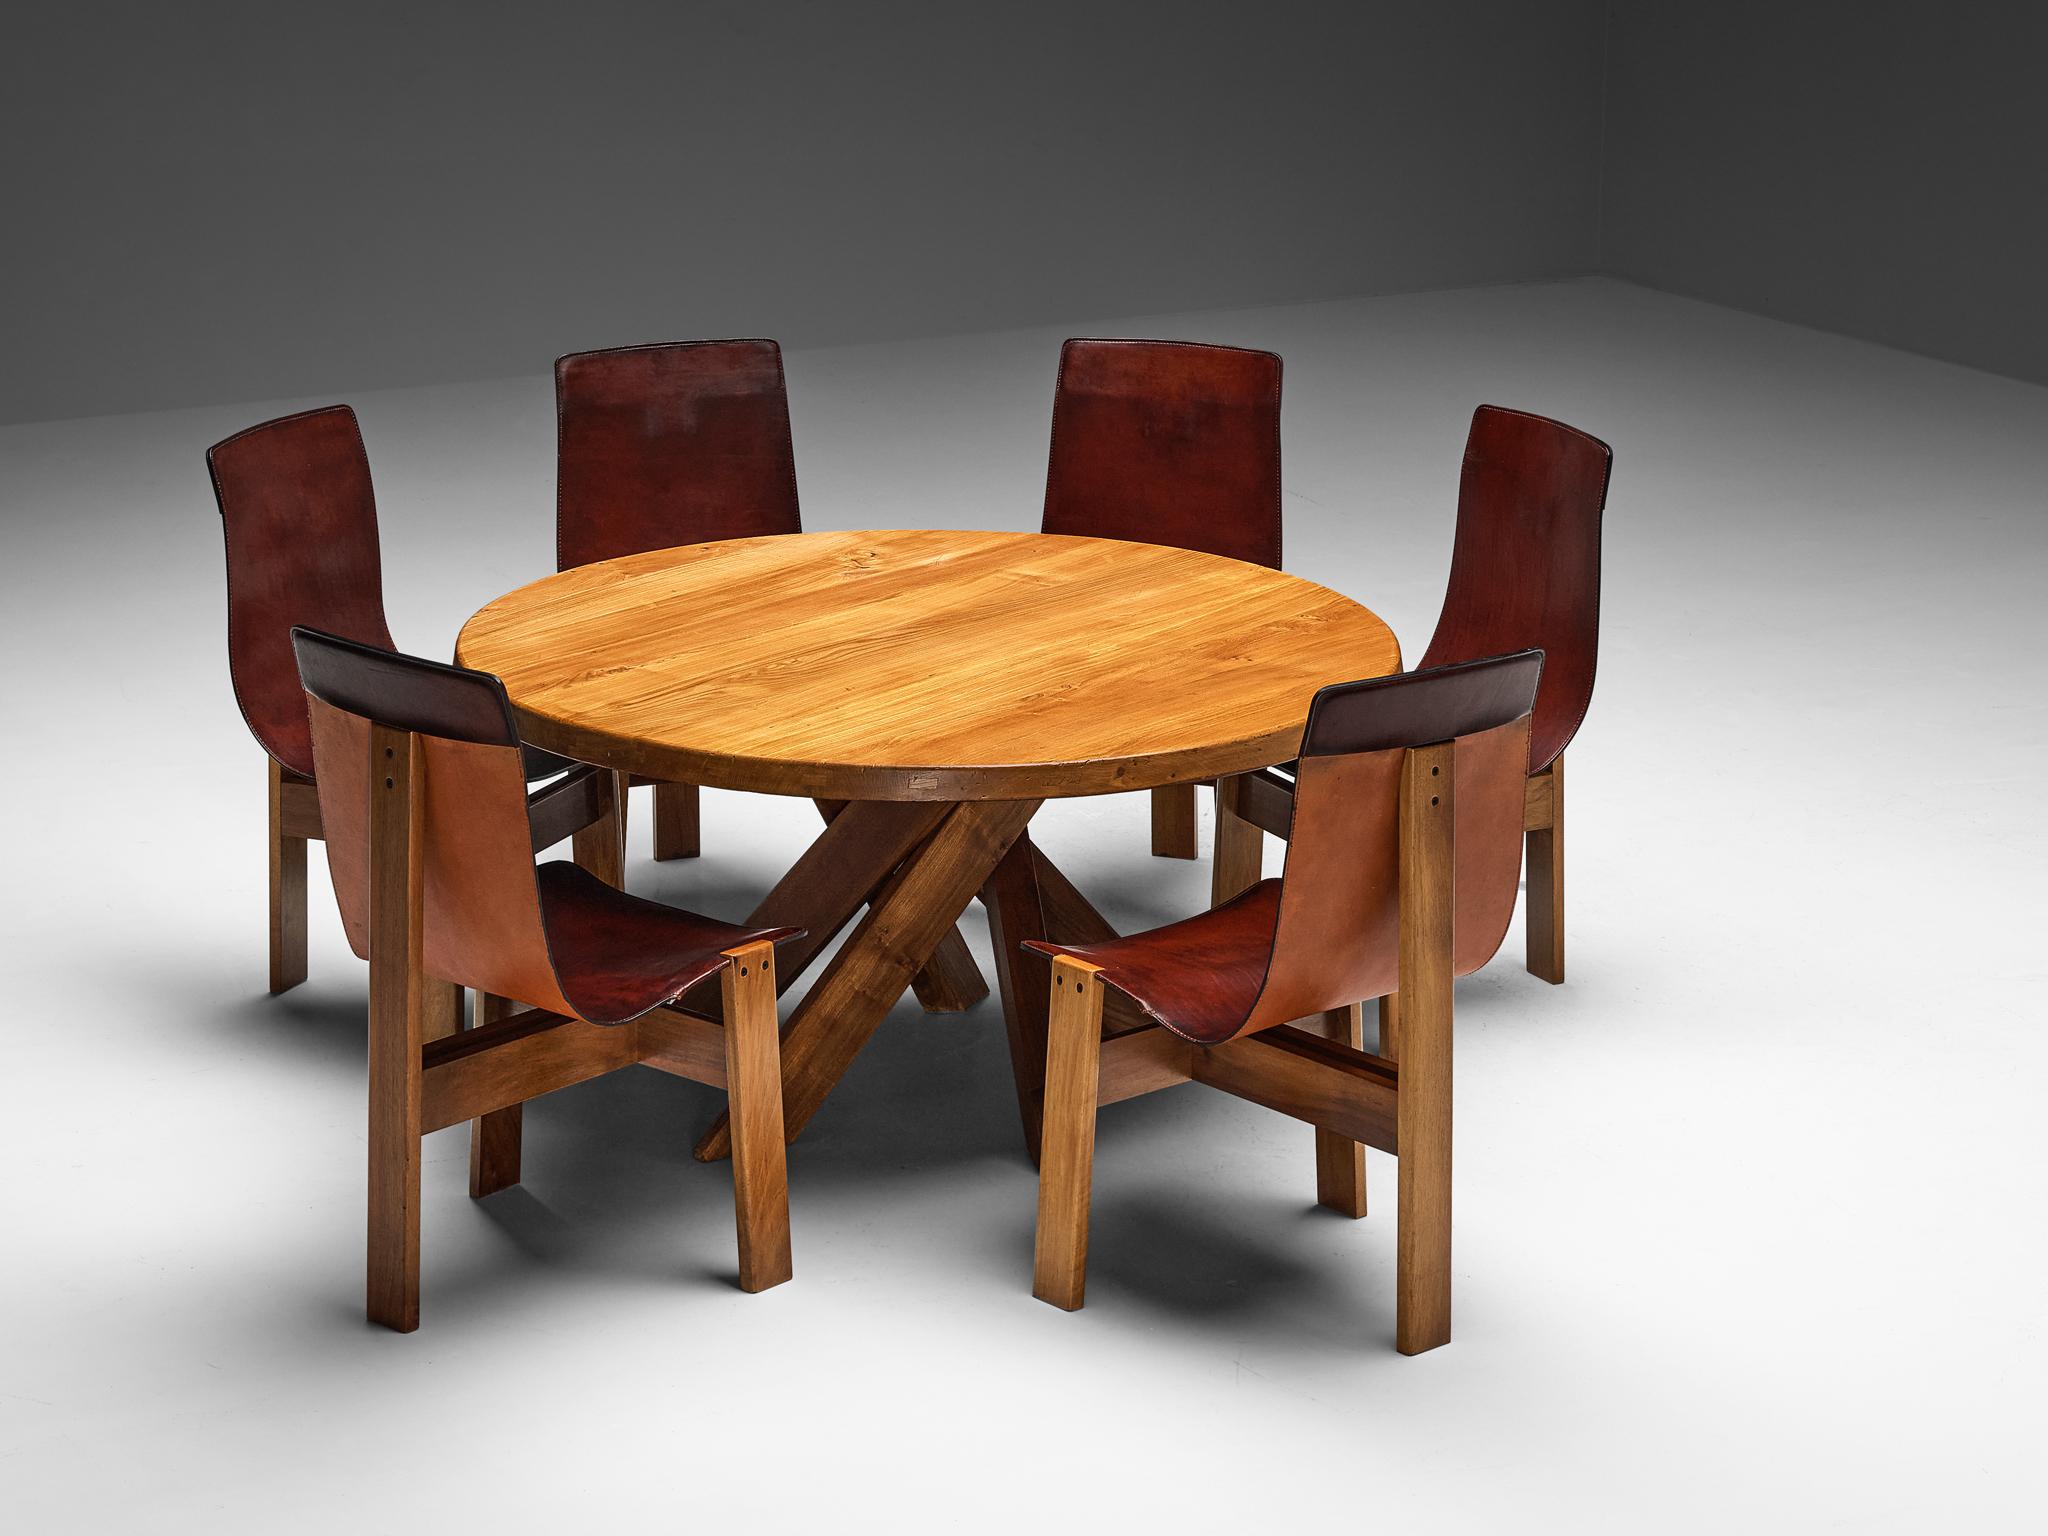 Dining room set containing Angelo Mangiarotti for Skipper set of six chairs with Pierre Chapo dining table model T21D


Angelo Mangiarotti for Skipper, set of six chairs, model 'Tre 3', walnut, saddle leather, Italy, 1978

Set of four 'Tre 3' dining